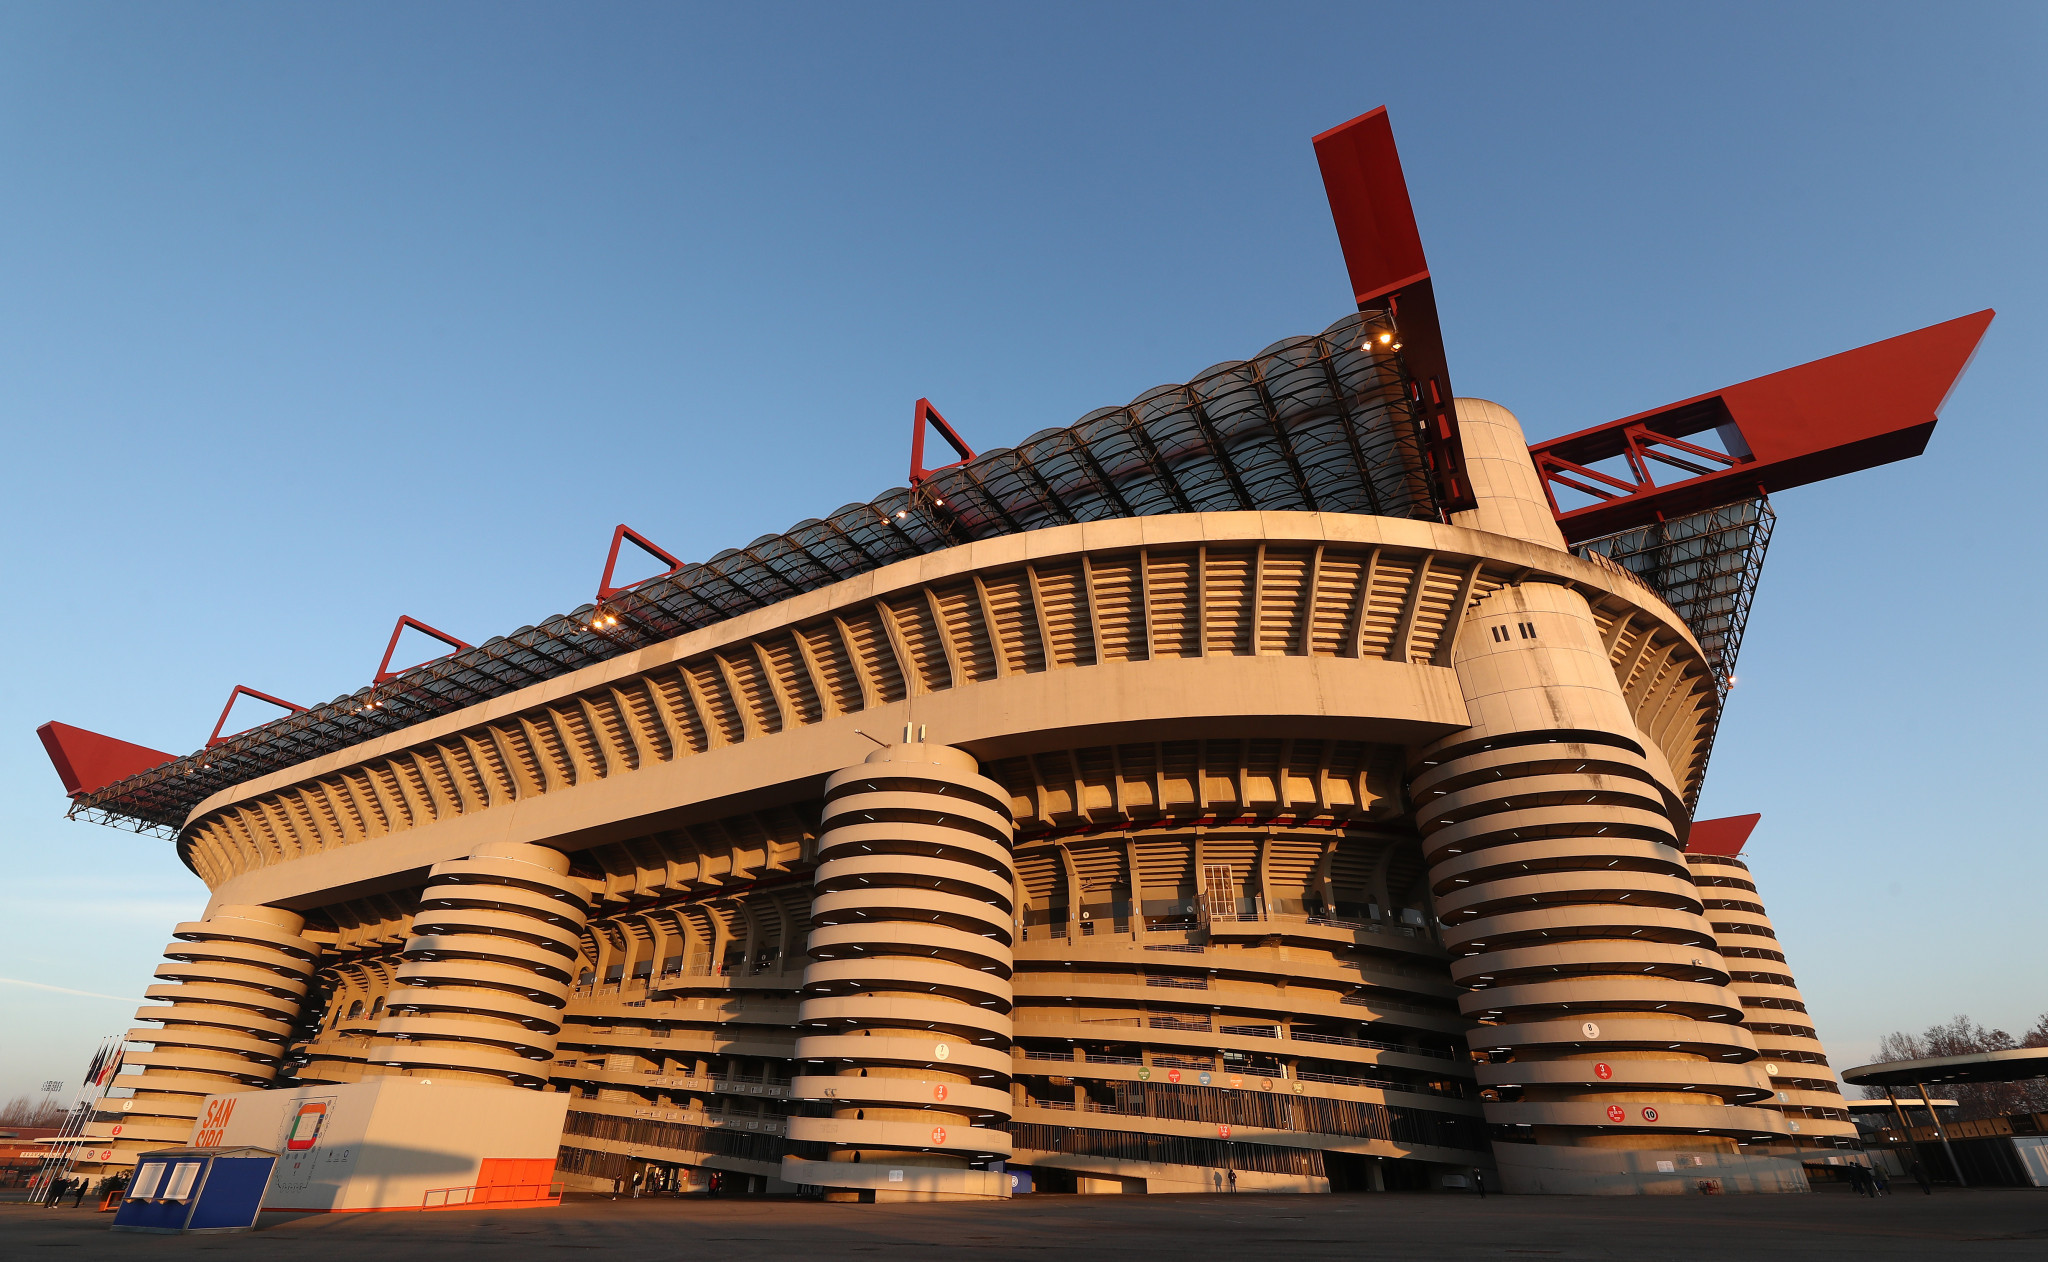 Football clubs ask for more time on decision for Milan Cortina 2026 venue San Siro